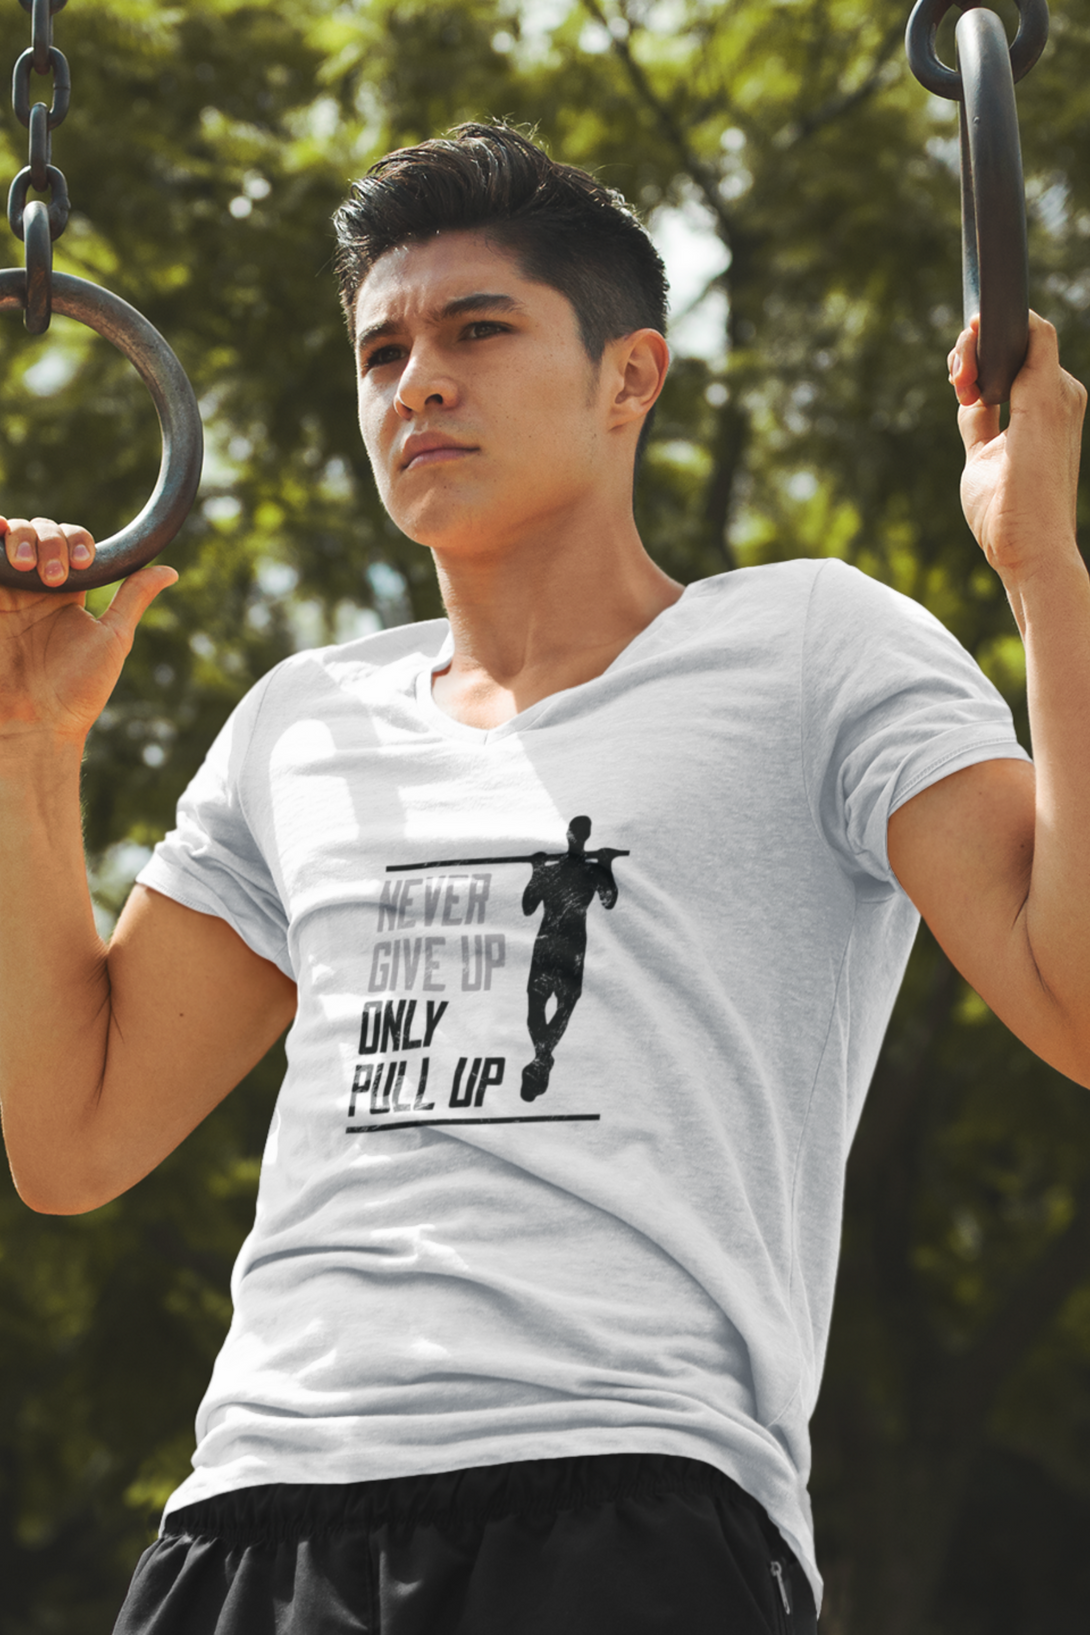 Never Give Up Only Pull Up Printed T-Shirt For Men - WowWaves - 6